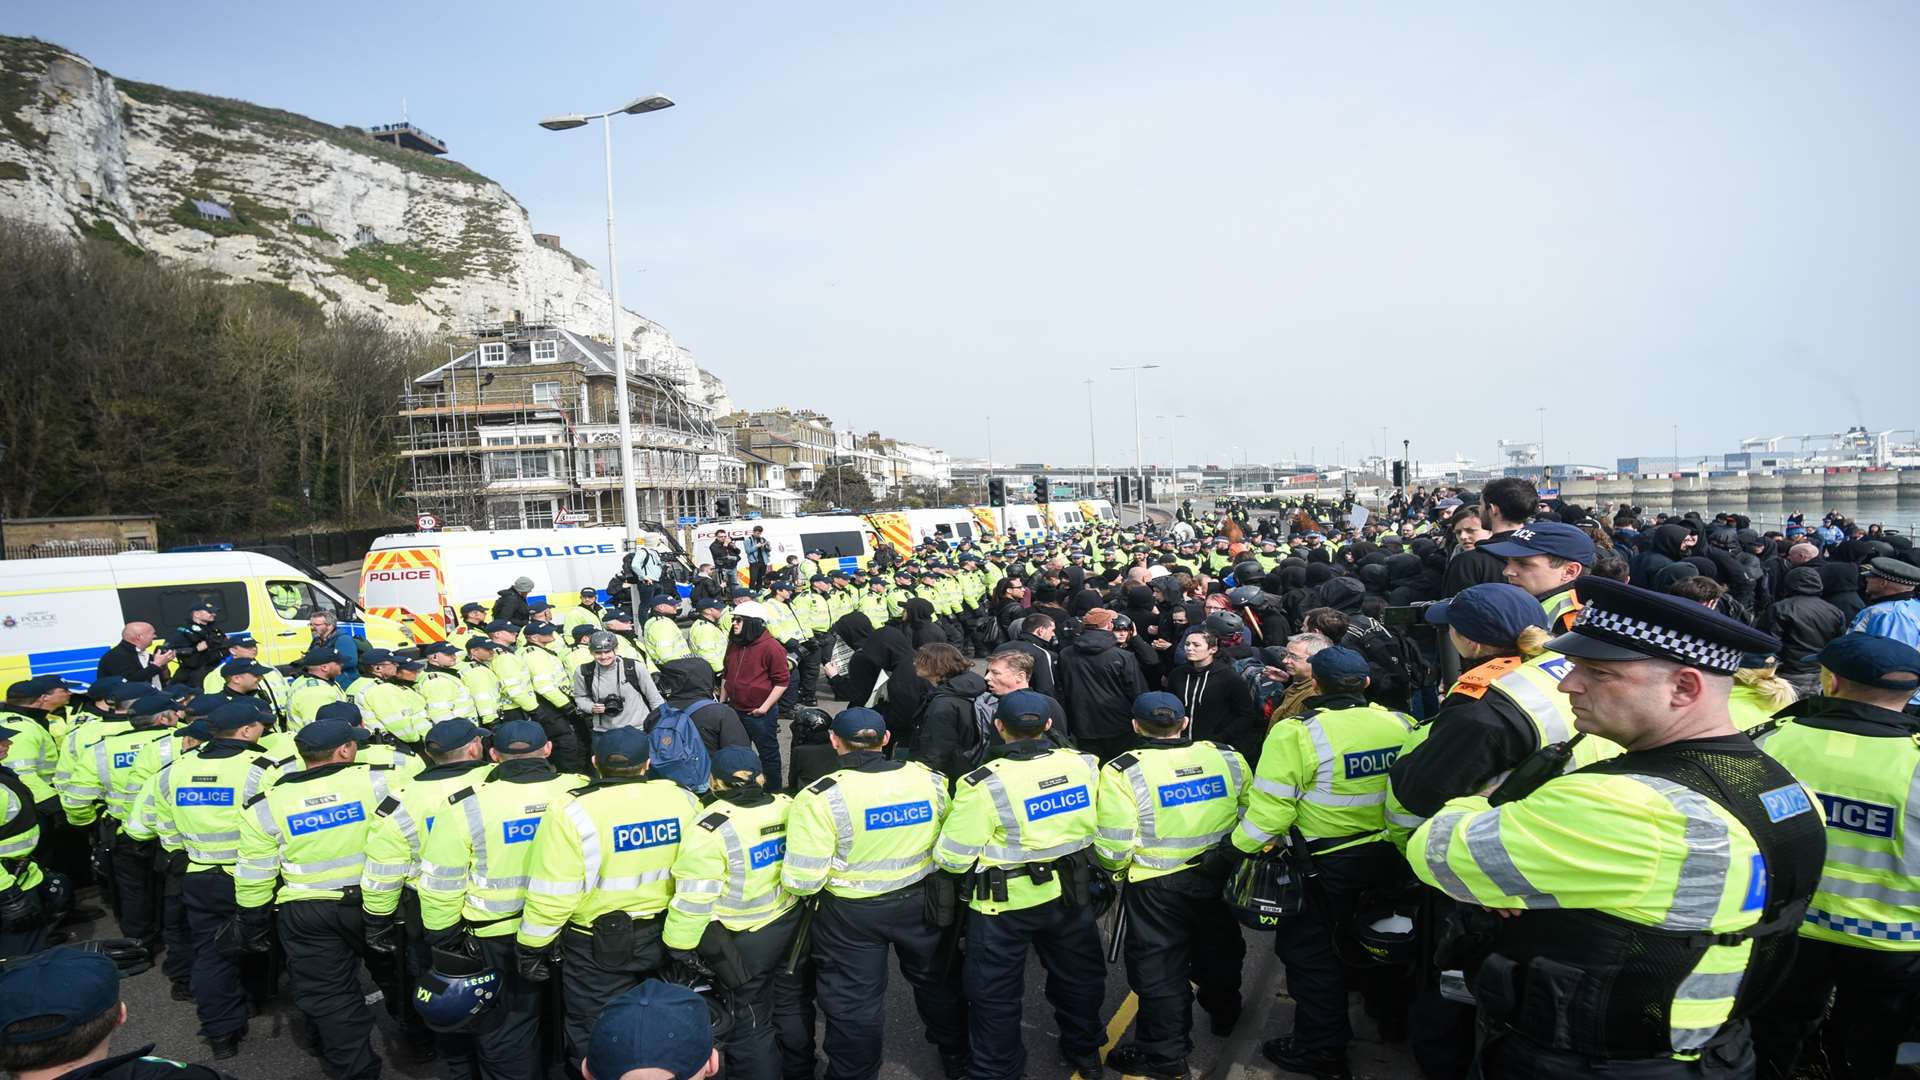 Police boxed the anti-fascist demonstrators in during the early April demonstration